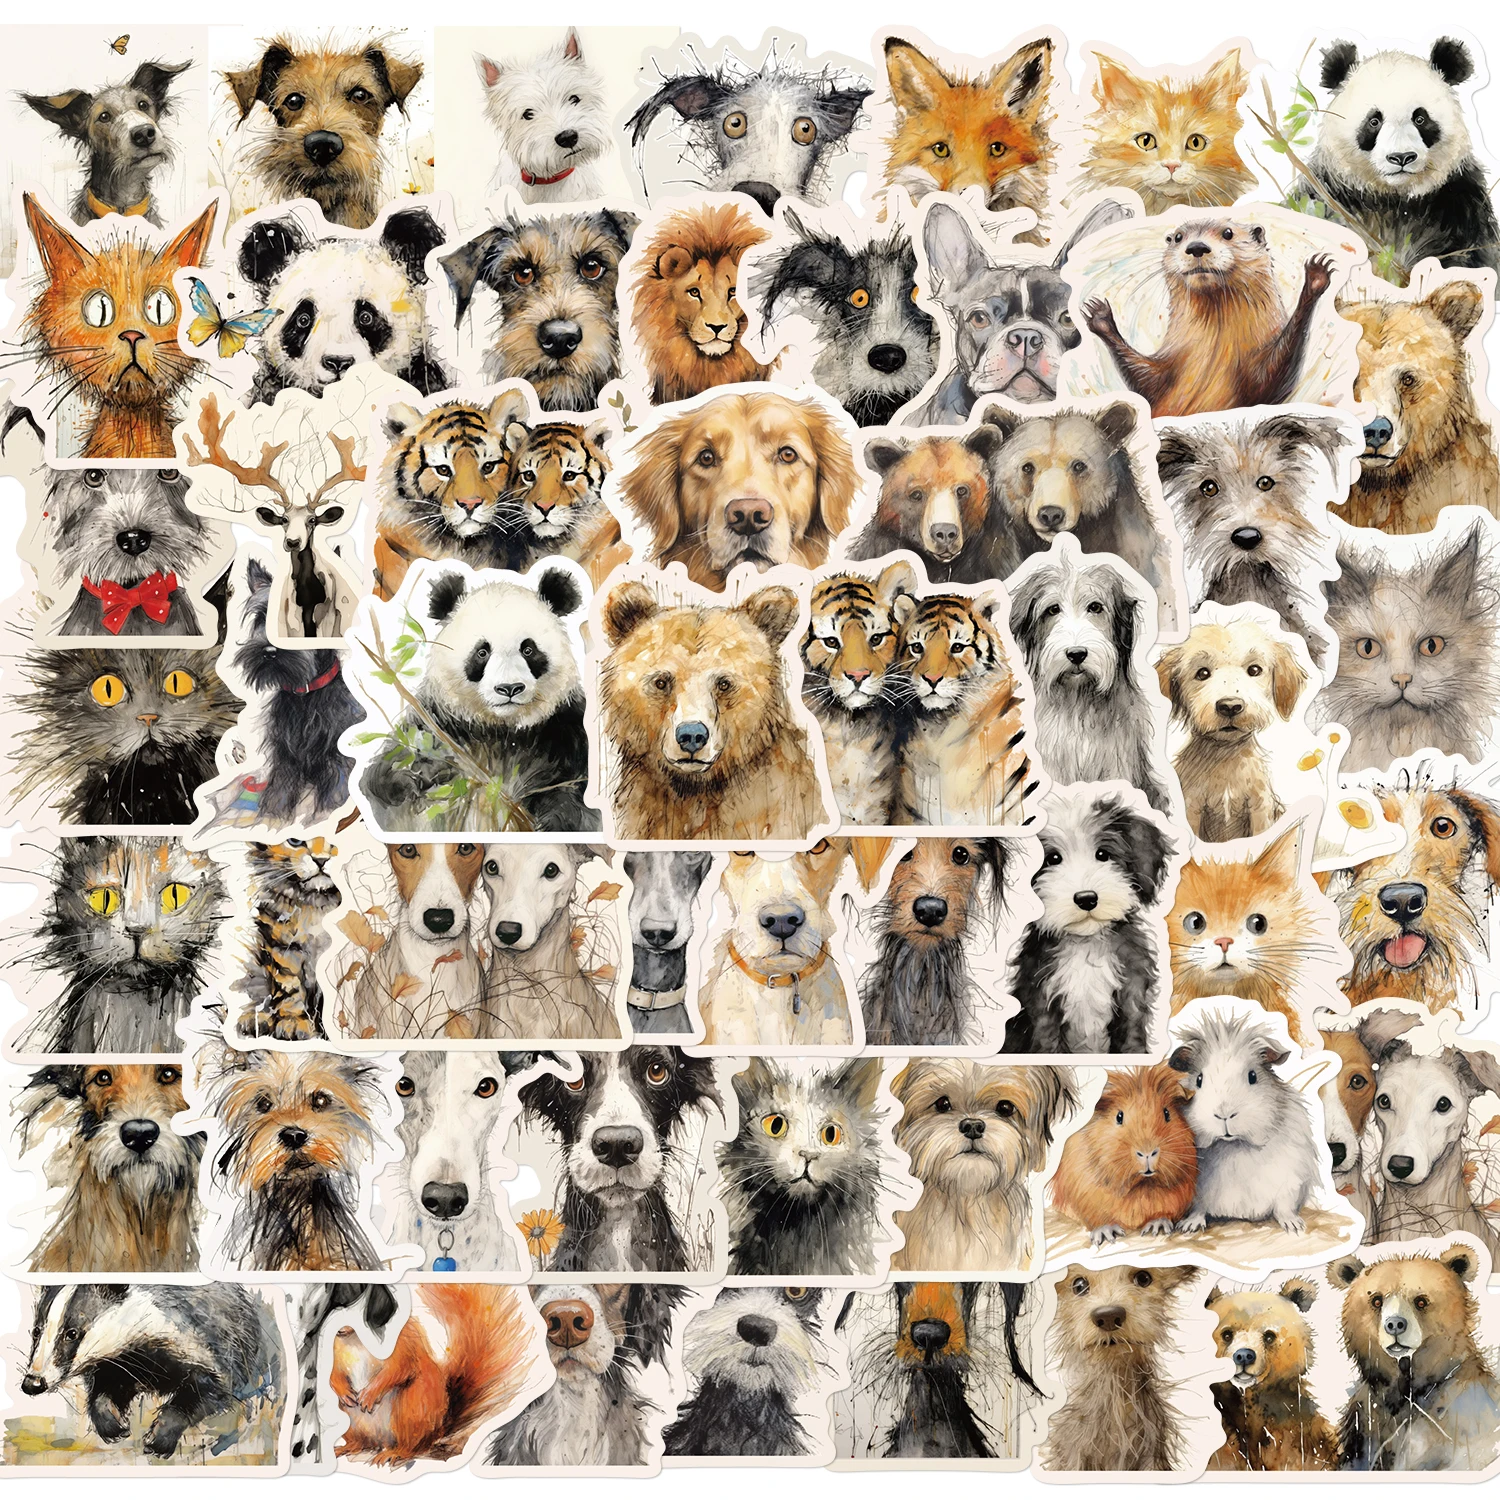 

50PCS Fried Animal Stickers Stationery Cafe Motorcycle Laptop Luggage Scrapbook For Guitar DIY Bottle Graffiti Pegatina Decals